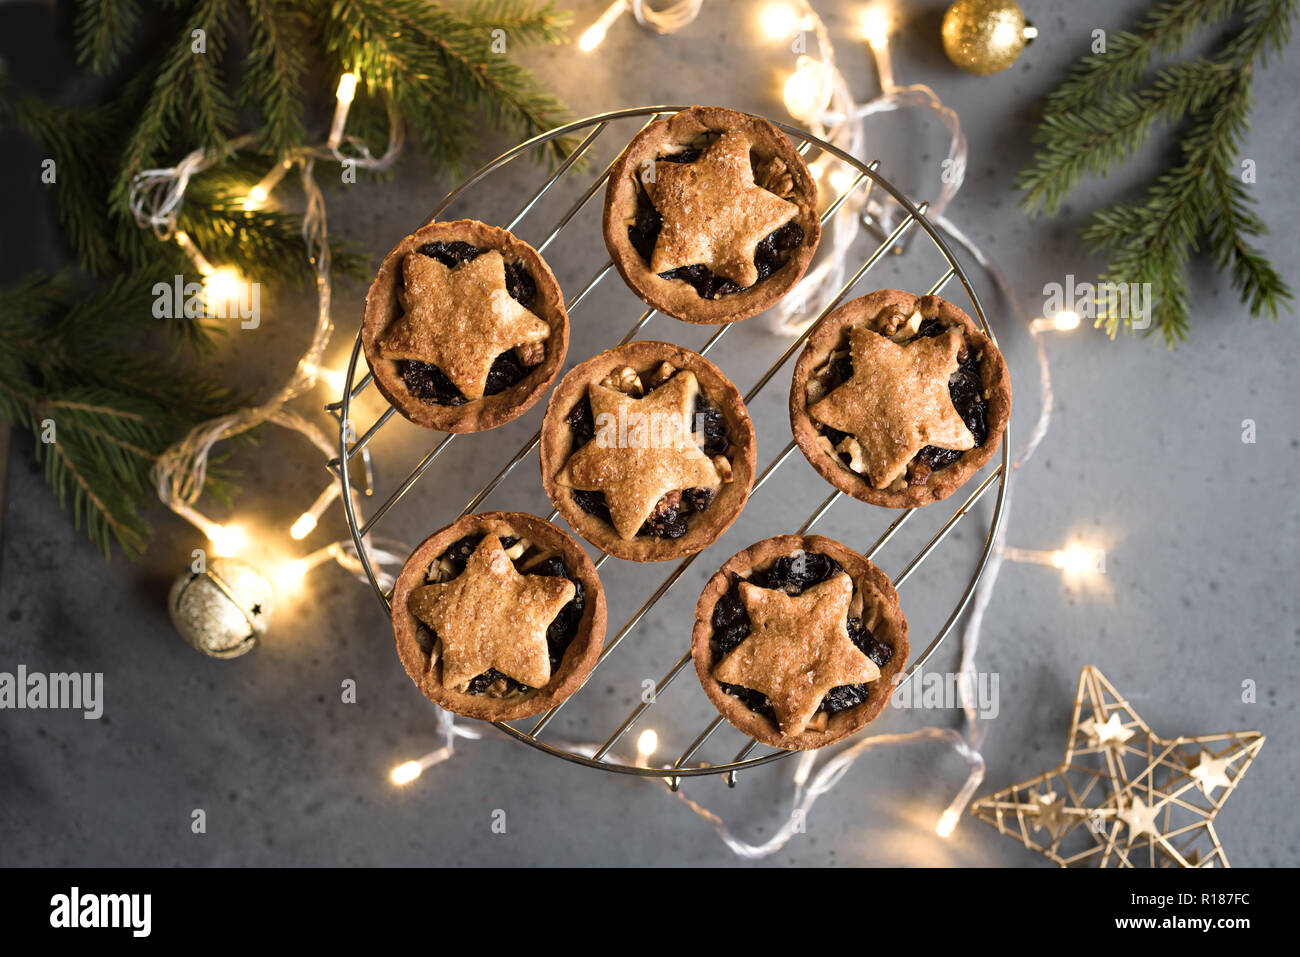 Mince Pies for Christmas on grey background with light and festive decor. Traditional Christmas dessert - mince pies with fruits and nuts. Stock Photo